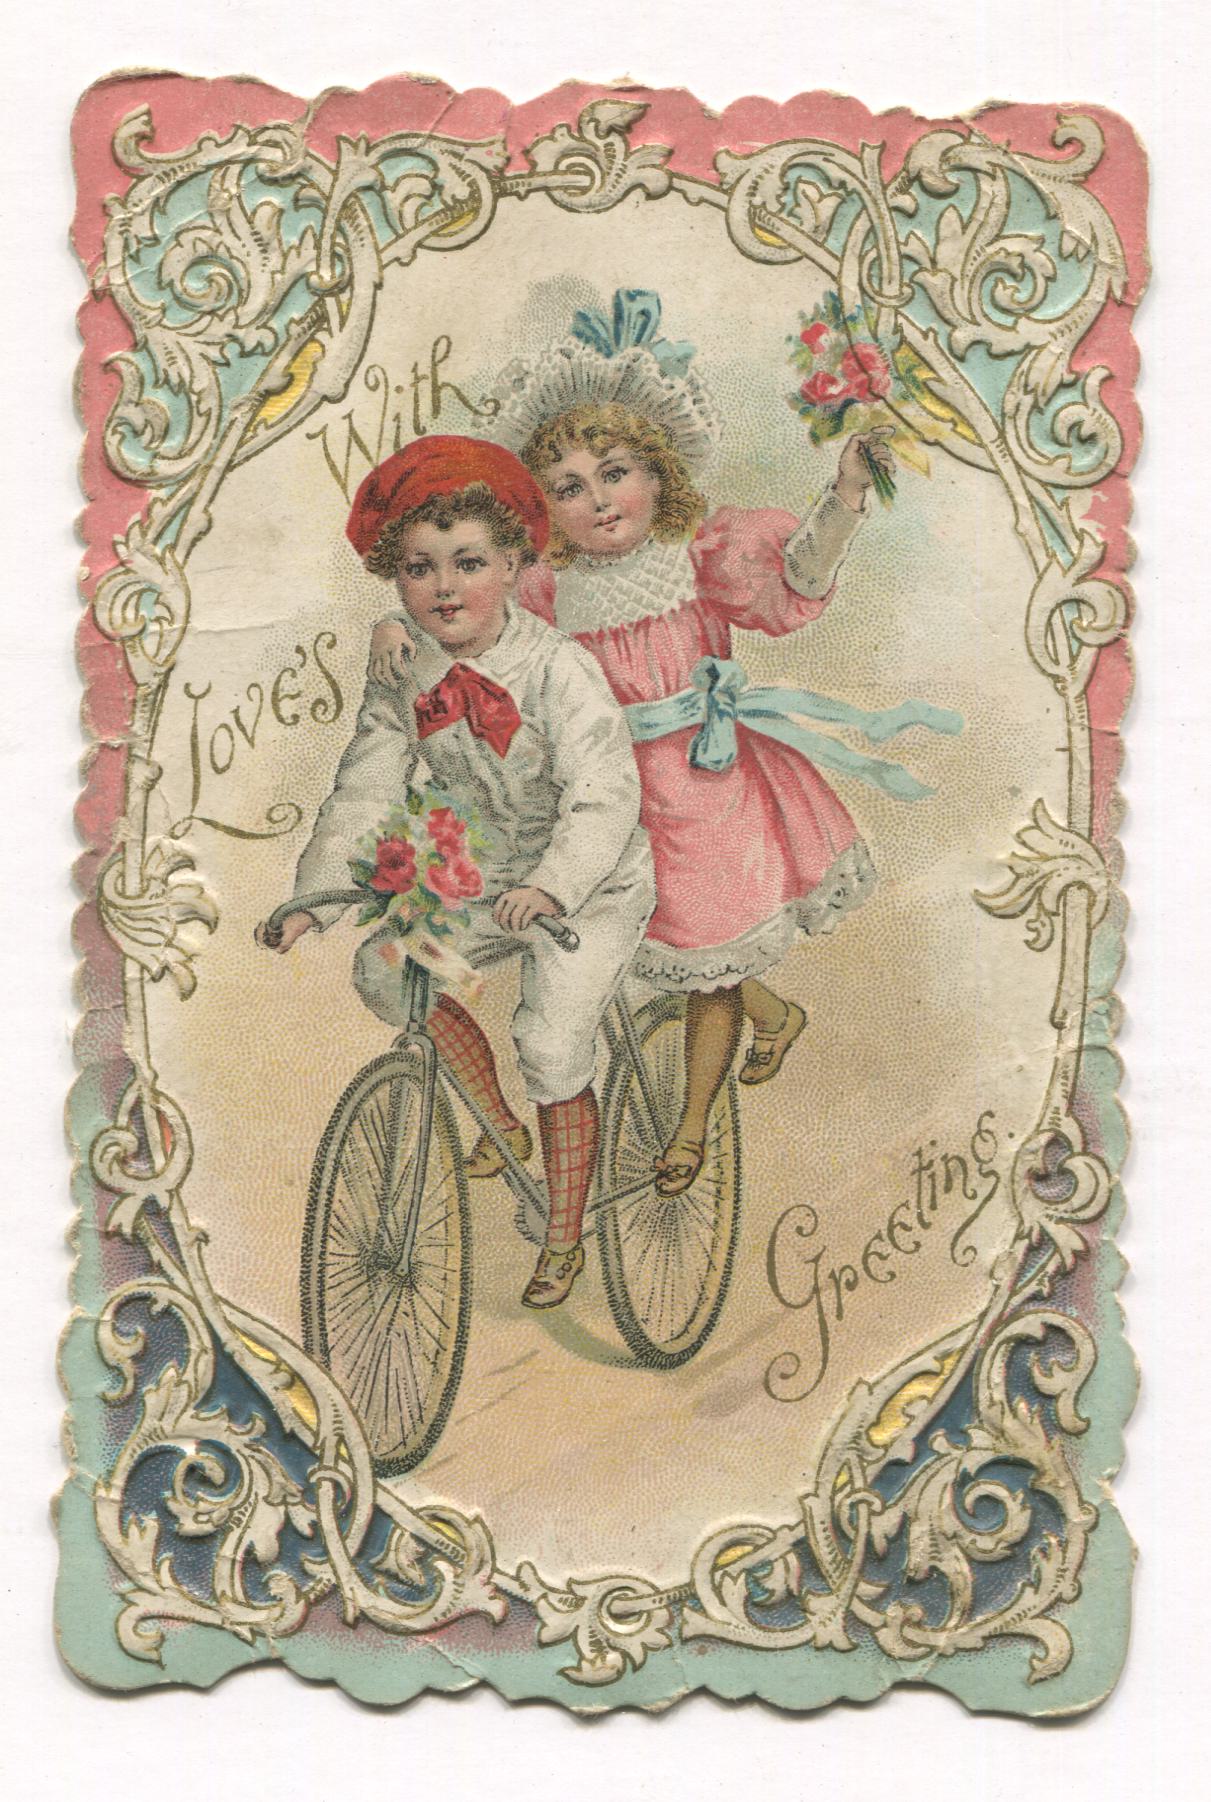 Antique Valentine Greeting Card with Bicycle Riders - "Forget Me Not" - 3.5" x 5.5"